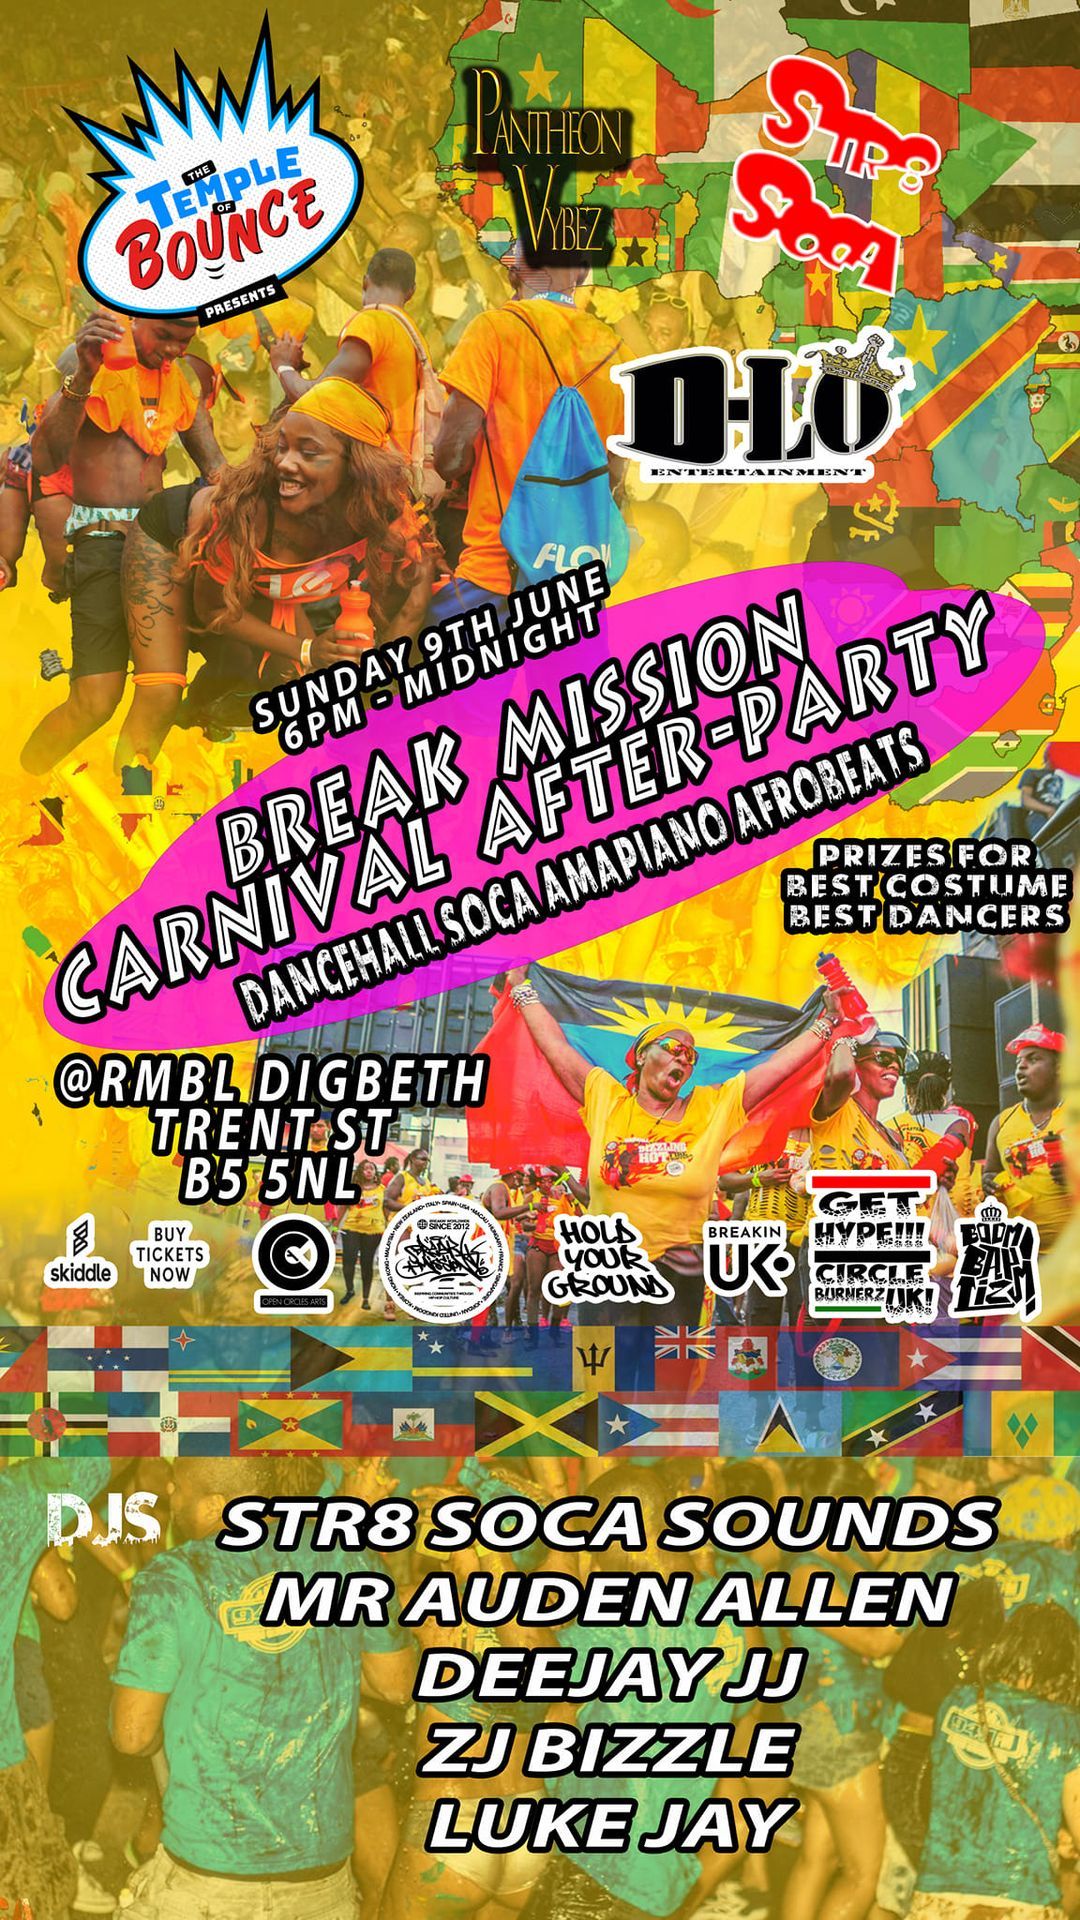 Official Break Mission Sunday Carnival After-Party 